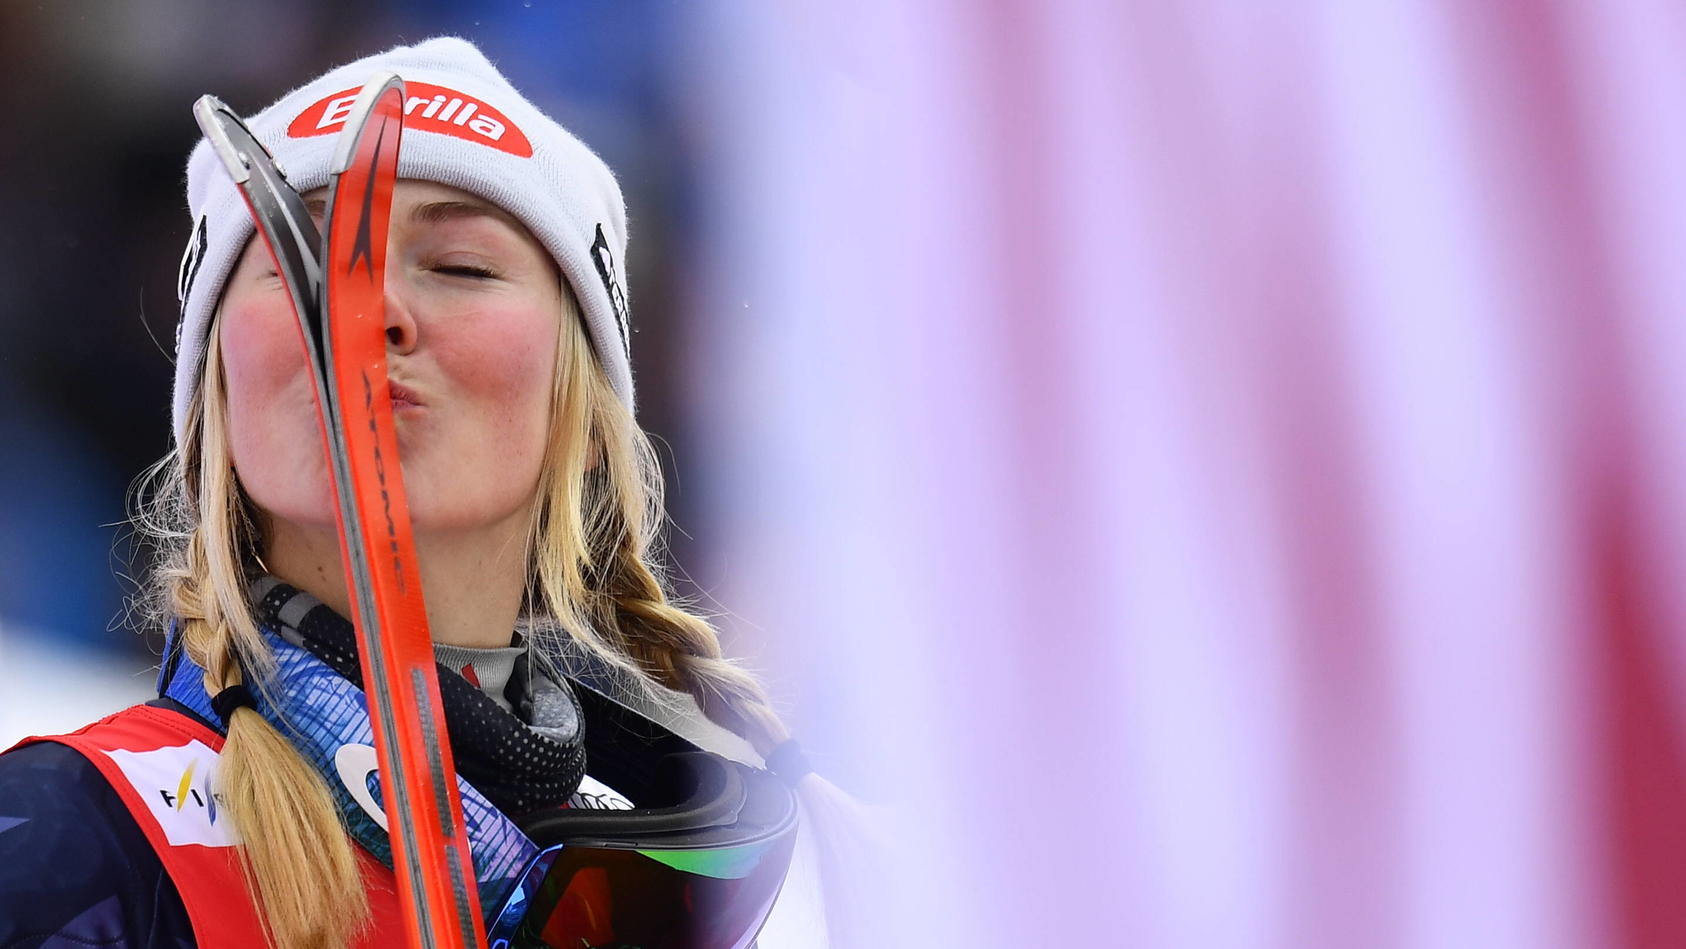 Mikaela Shiffrin of USA reacts after the Alpine Skiing World Cup women s slalom event in Spindleruv Mlyn, Czech Republic, January 28, 2023. CTKxPhoto/RadekxPetrasek CTKPhotoP2023012803888 PUBLICATIONxNOTxINxCZExSVK P2023012803888